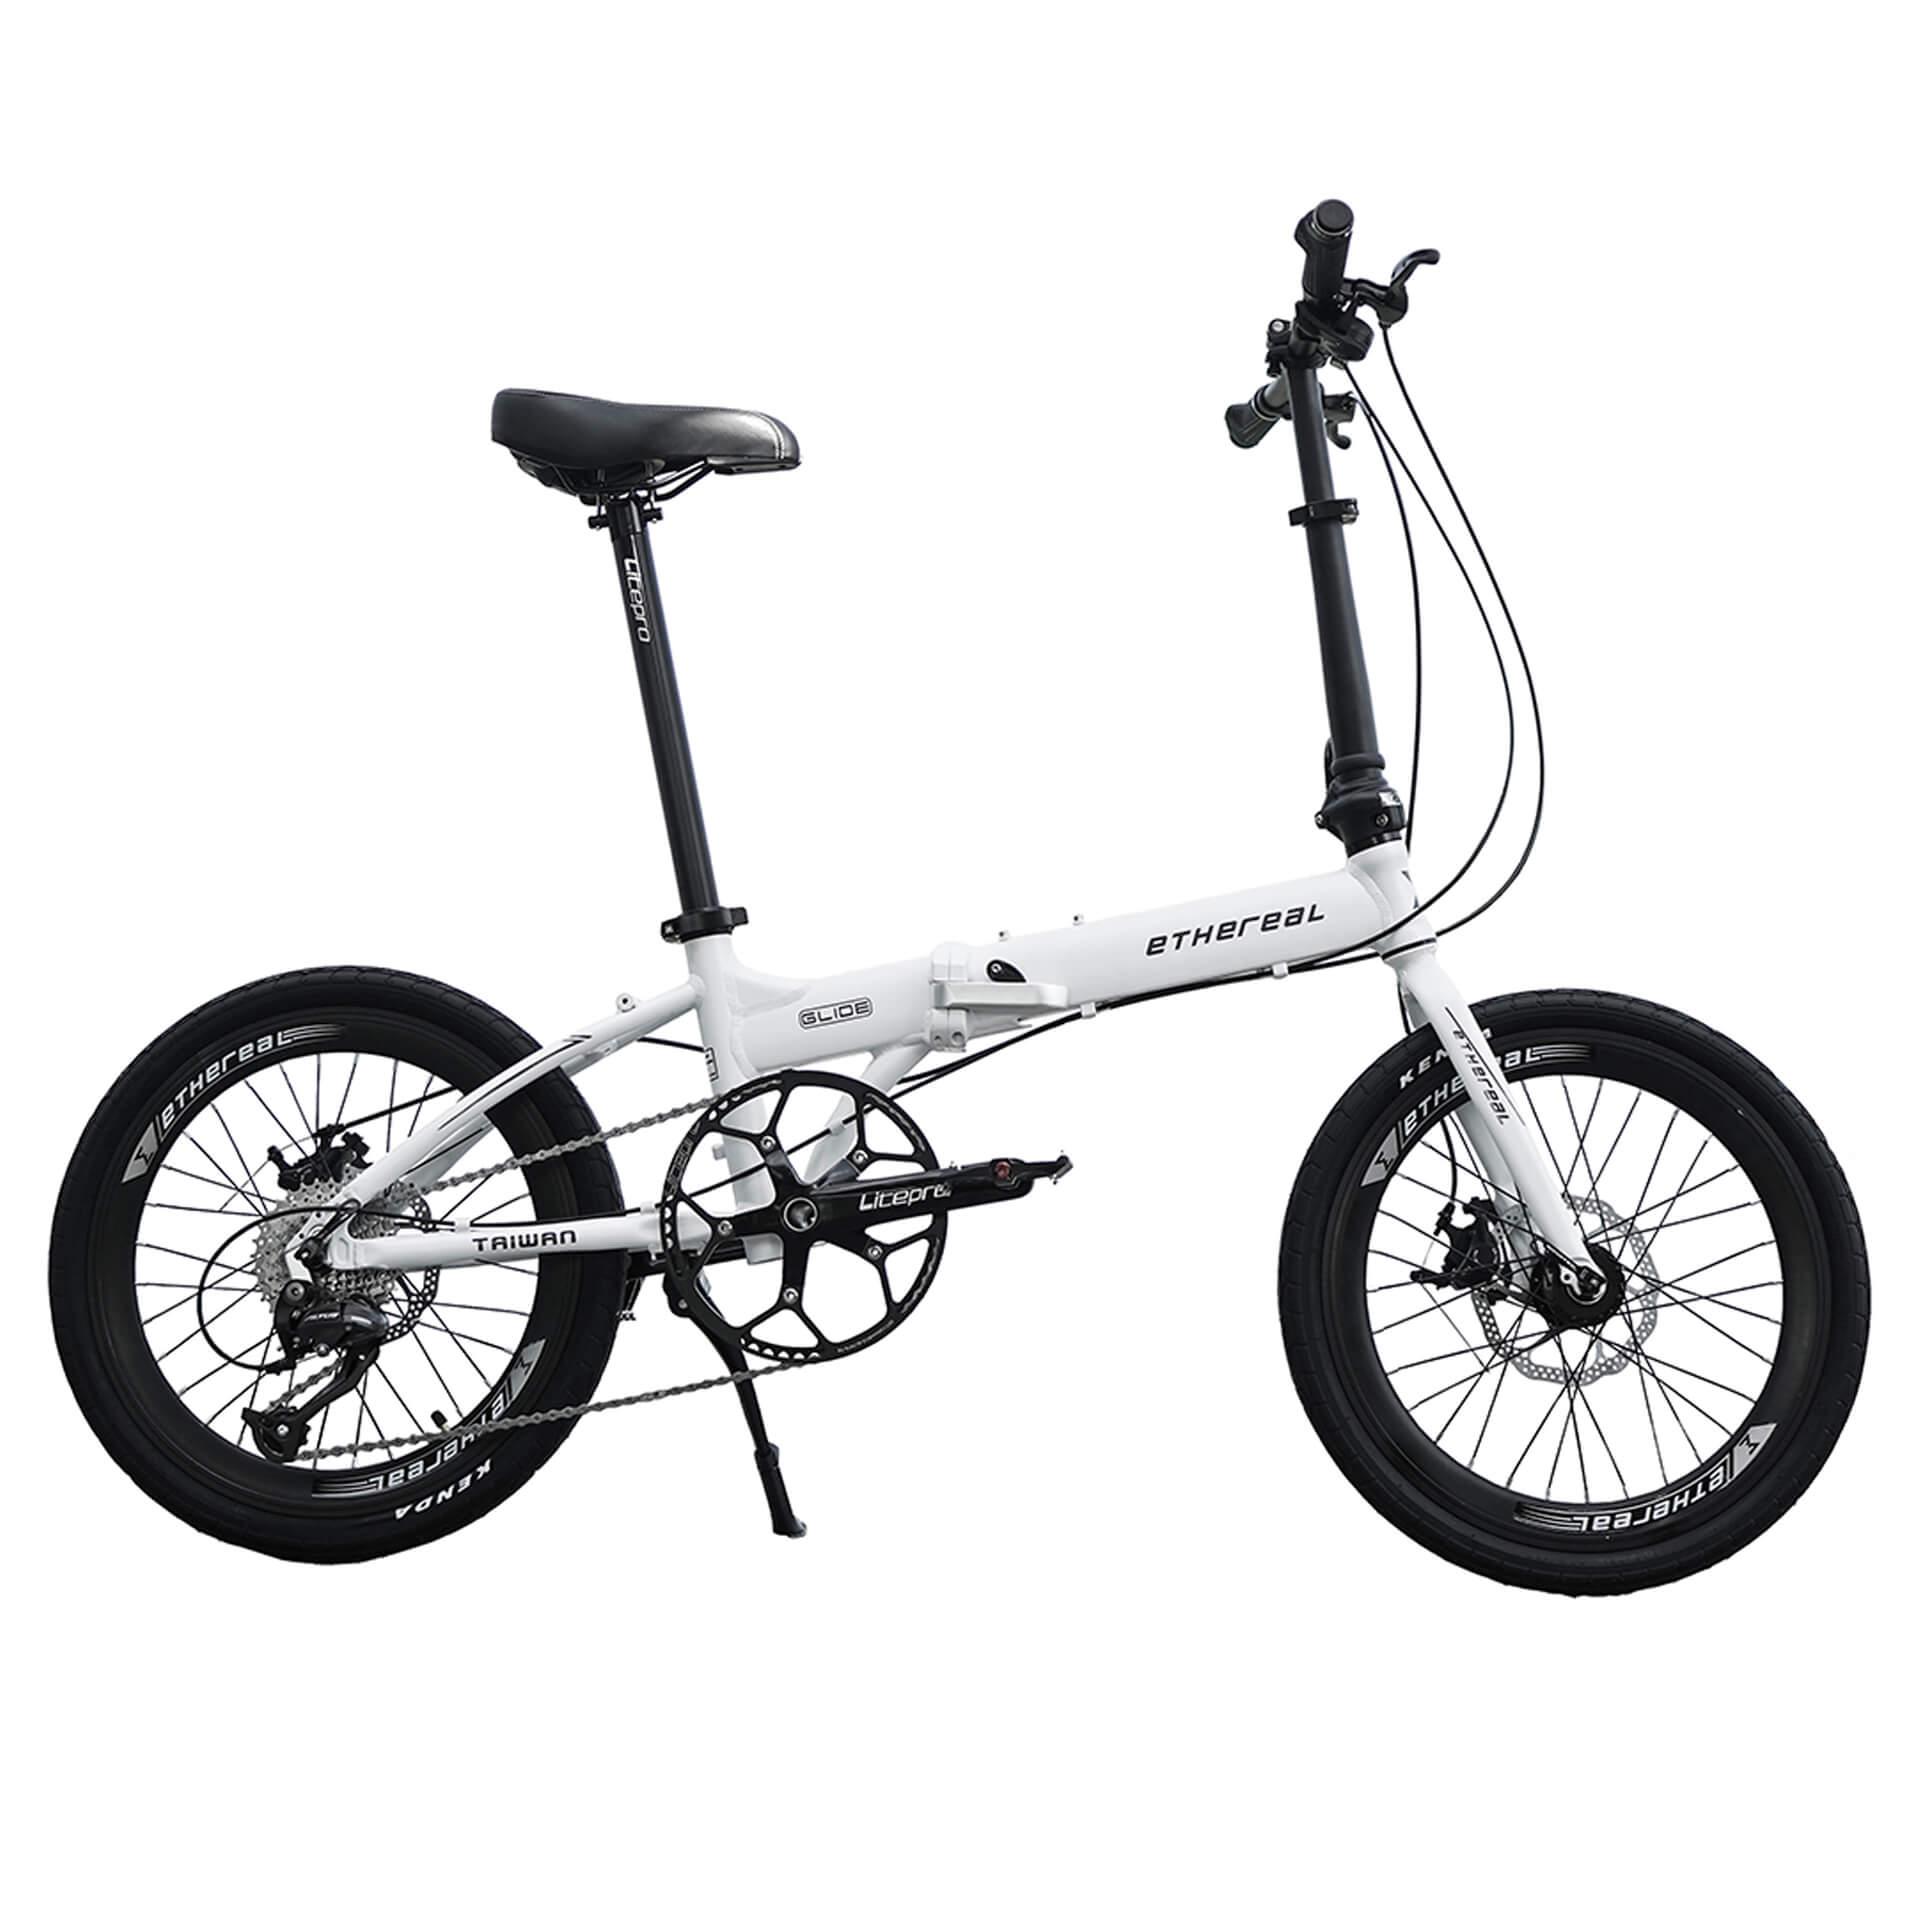 Foldable Ethereal Glide D9 bicycle with lightweight aluminum alloy frame, 9-speed Shimano Altus derailleur, Kenda pneumatic tires, and Zoom X-Tech semi-hydraulic brakes - The Bike Atrium - Best Bicycle Shop in Singapore